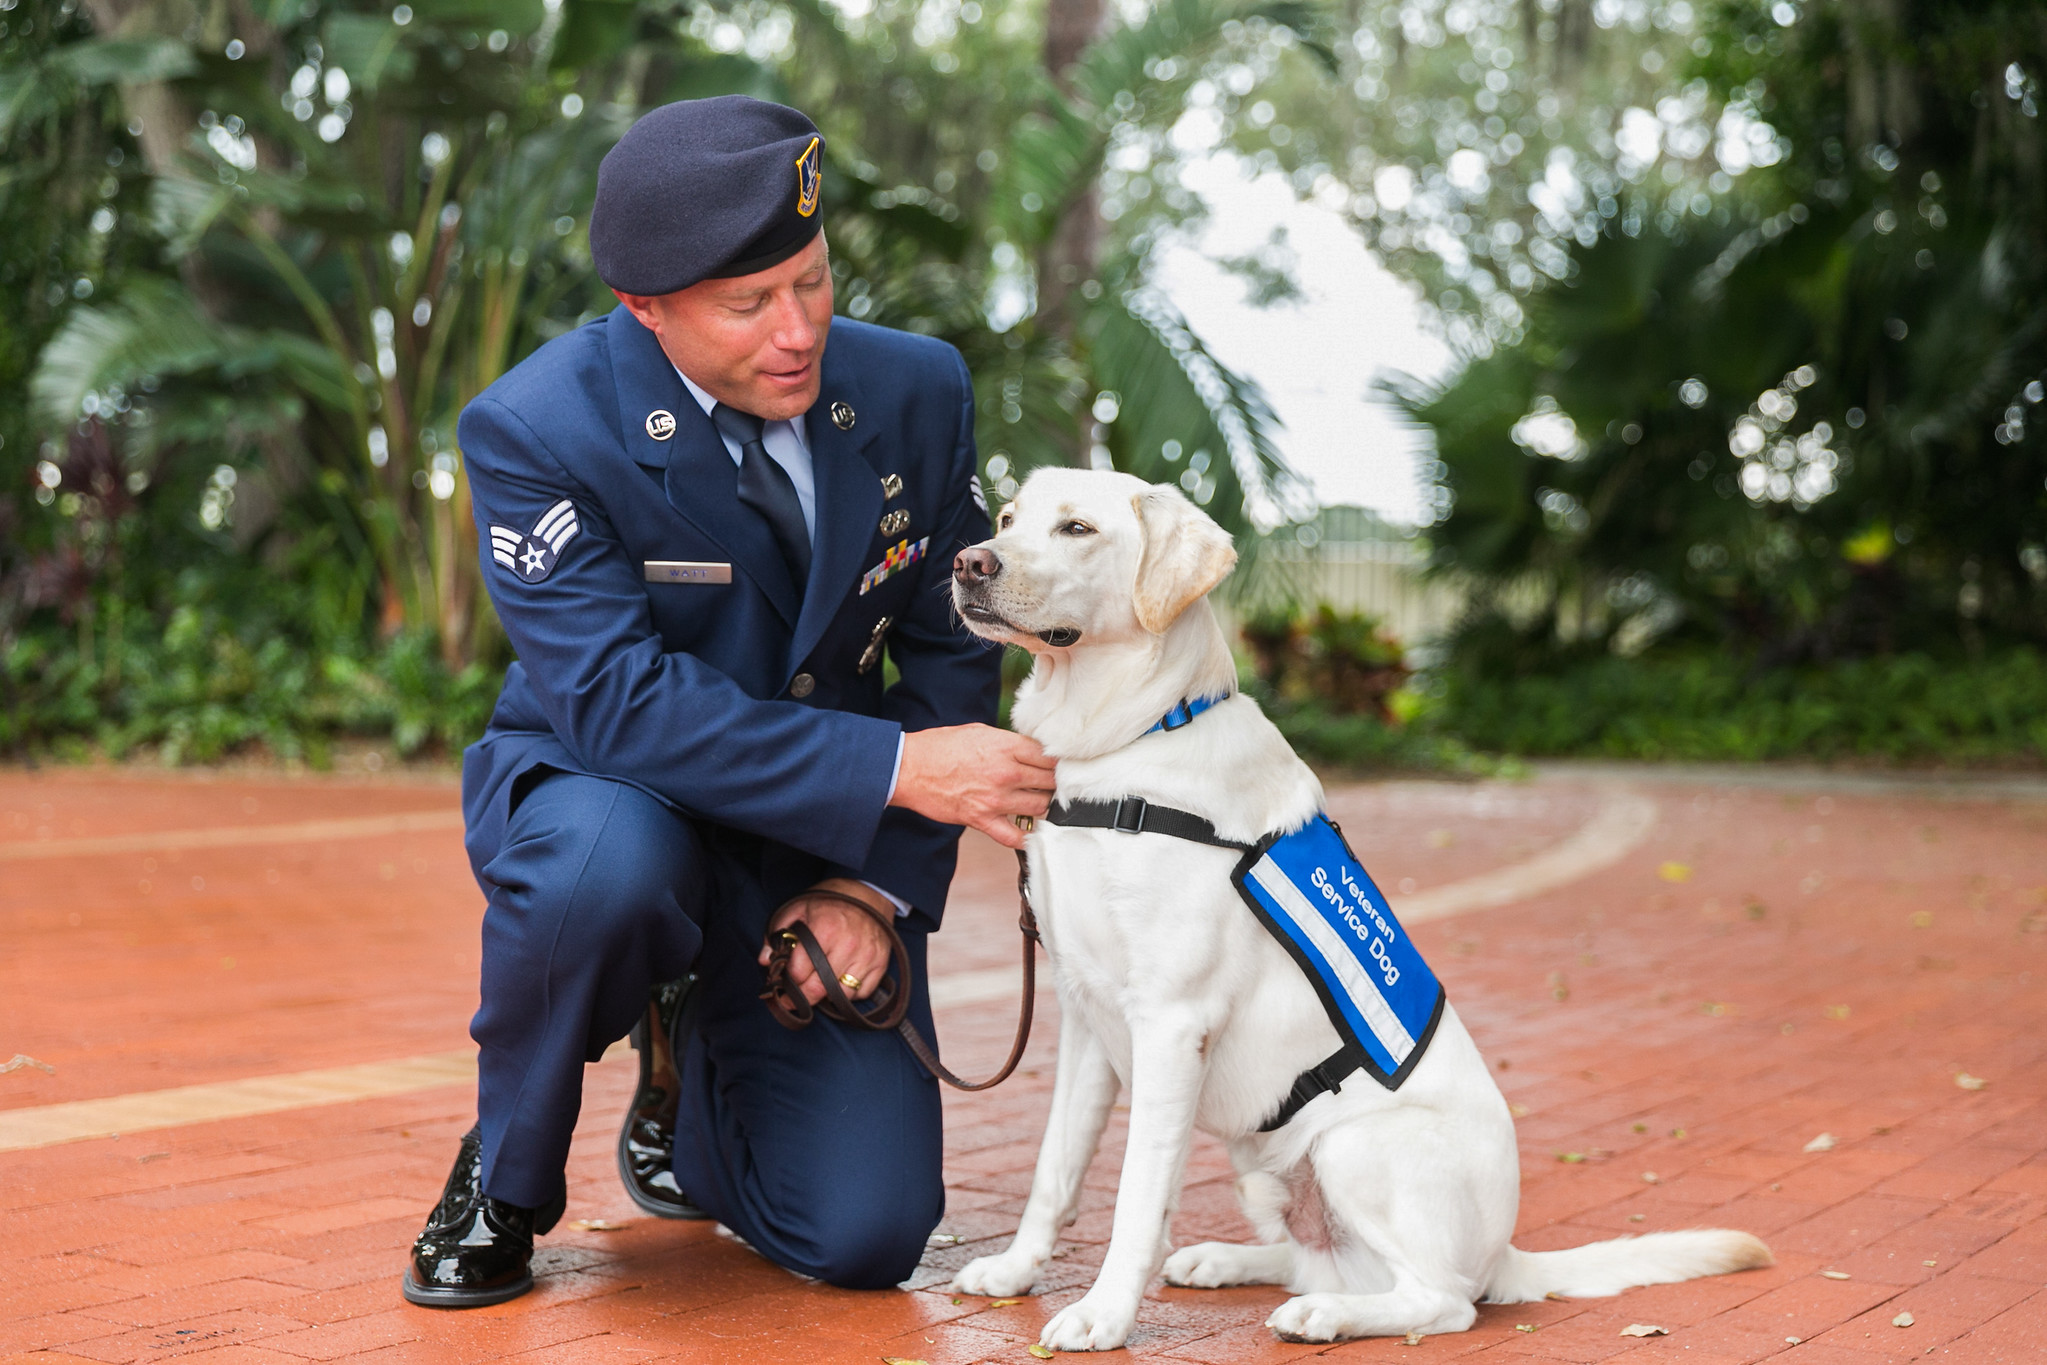 Man in Air Force uniform looks down and kneels next to yellow service dog in training who is looking off into the distance